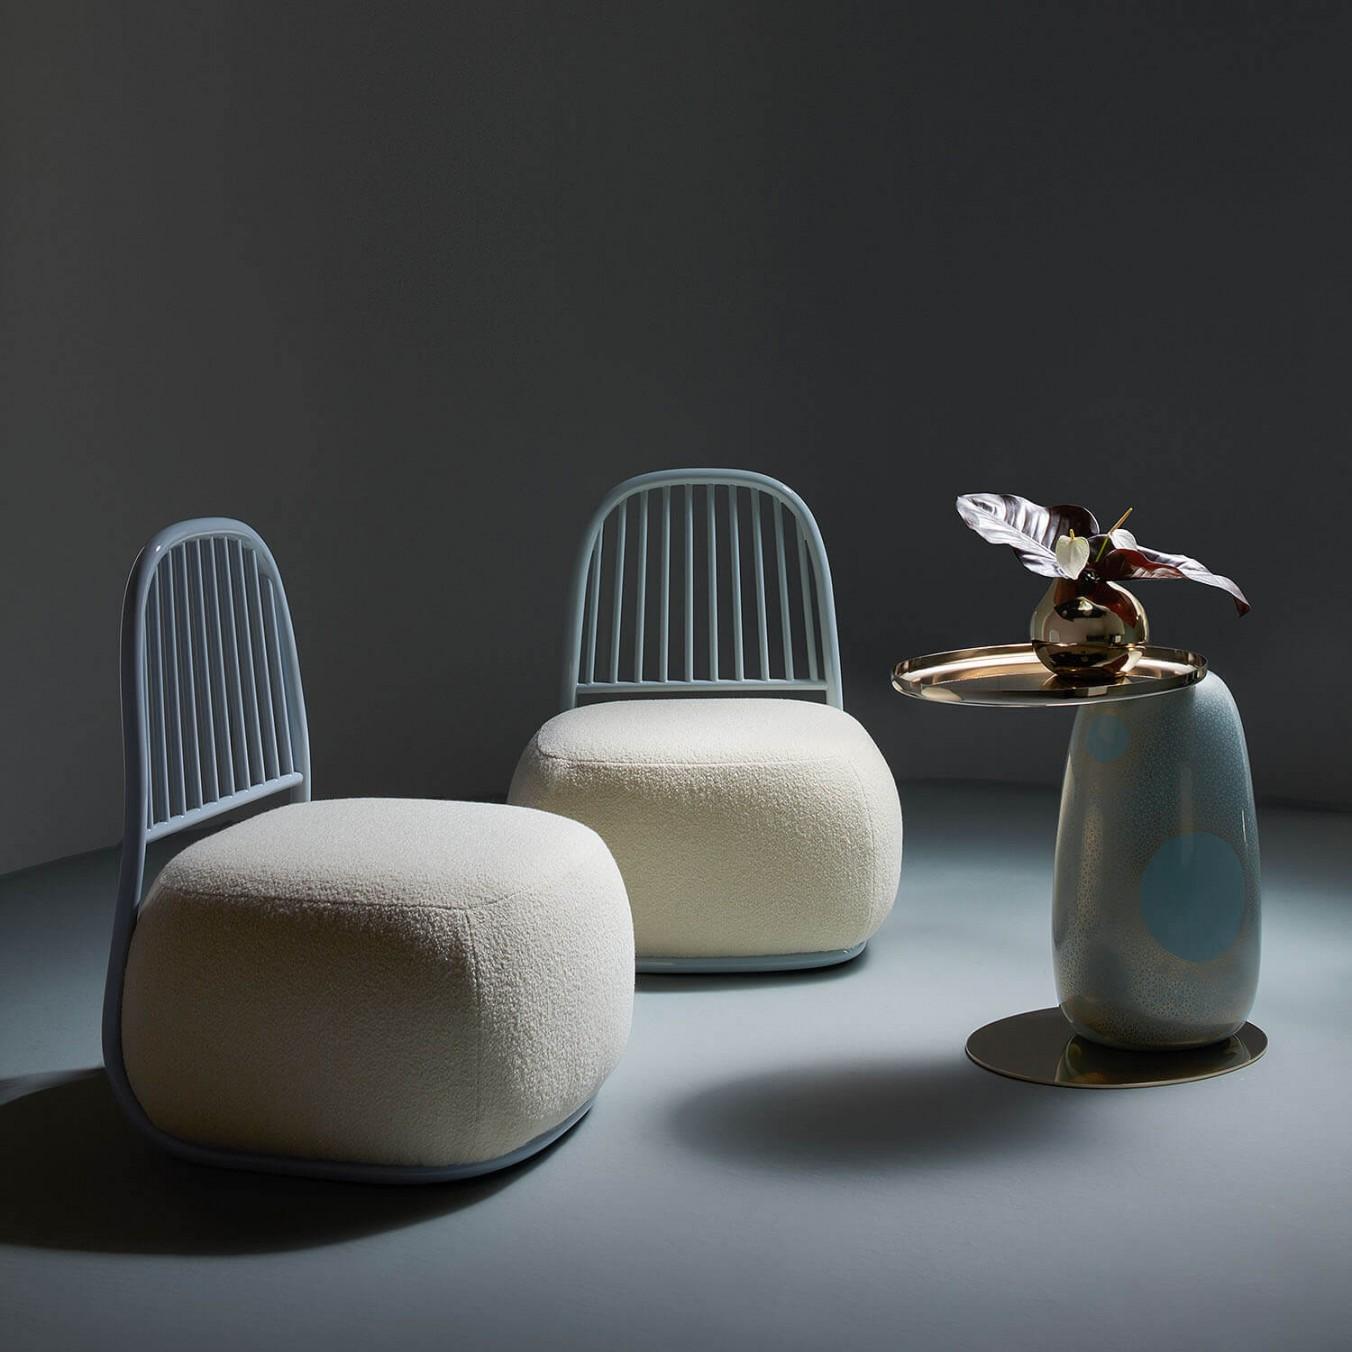 Pair of Contemporary Ivory Upholstered Lounge Chairs - Circe by Ini Archibong

Inviting and almost animated, the Circe Lounge Chair has a playful personality. With a deep upholstered seat and harp-like back, Archibong says that it “provides